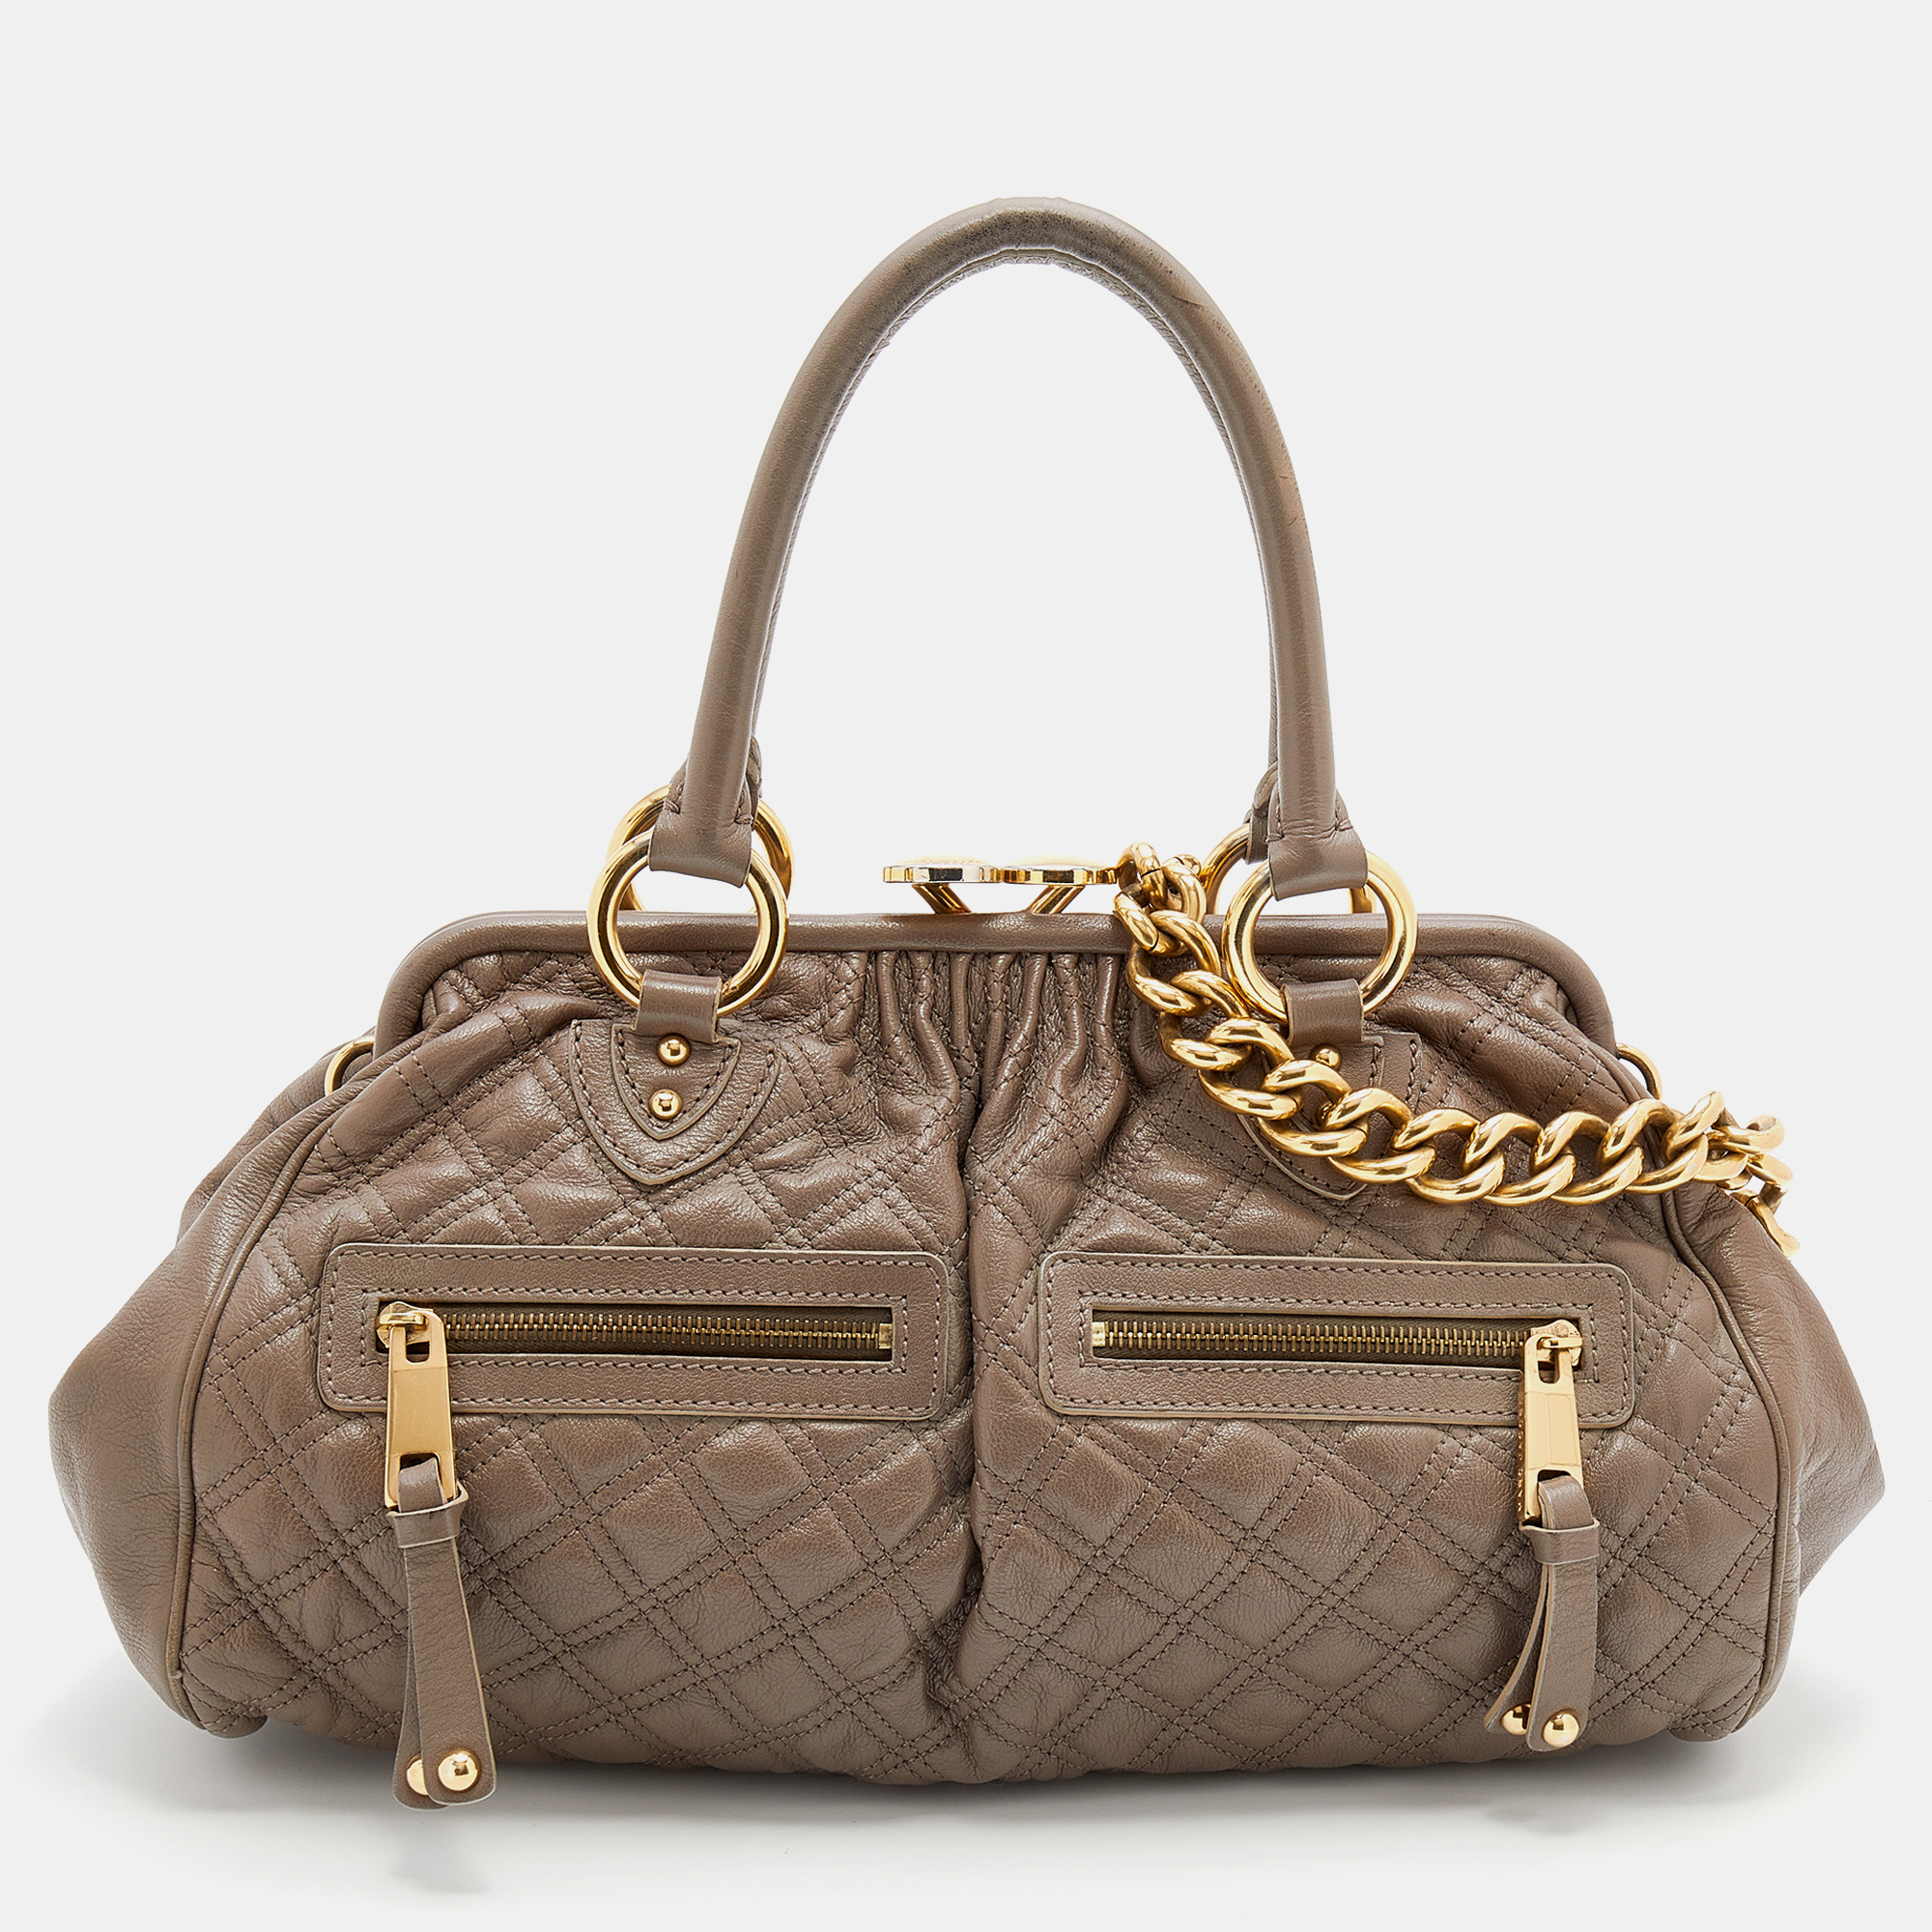 Easy to carry and stylish in appearance this Stam satchel from the House of Marc Jacobs will certainly be your favorite pick this season. It is crafted using grey quilted leather with gold tone hardware elevating its beauty. It provides two handles and a spacious fabric lined interior.